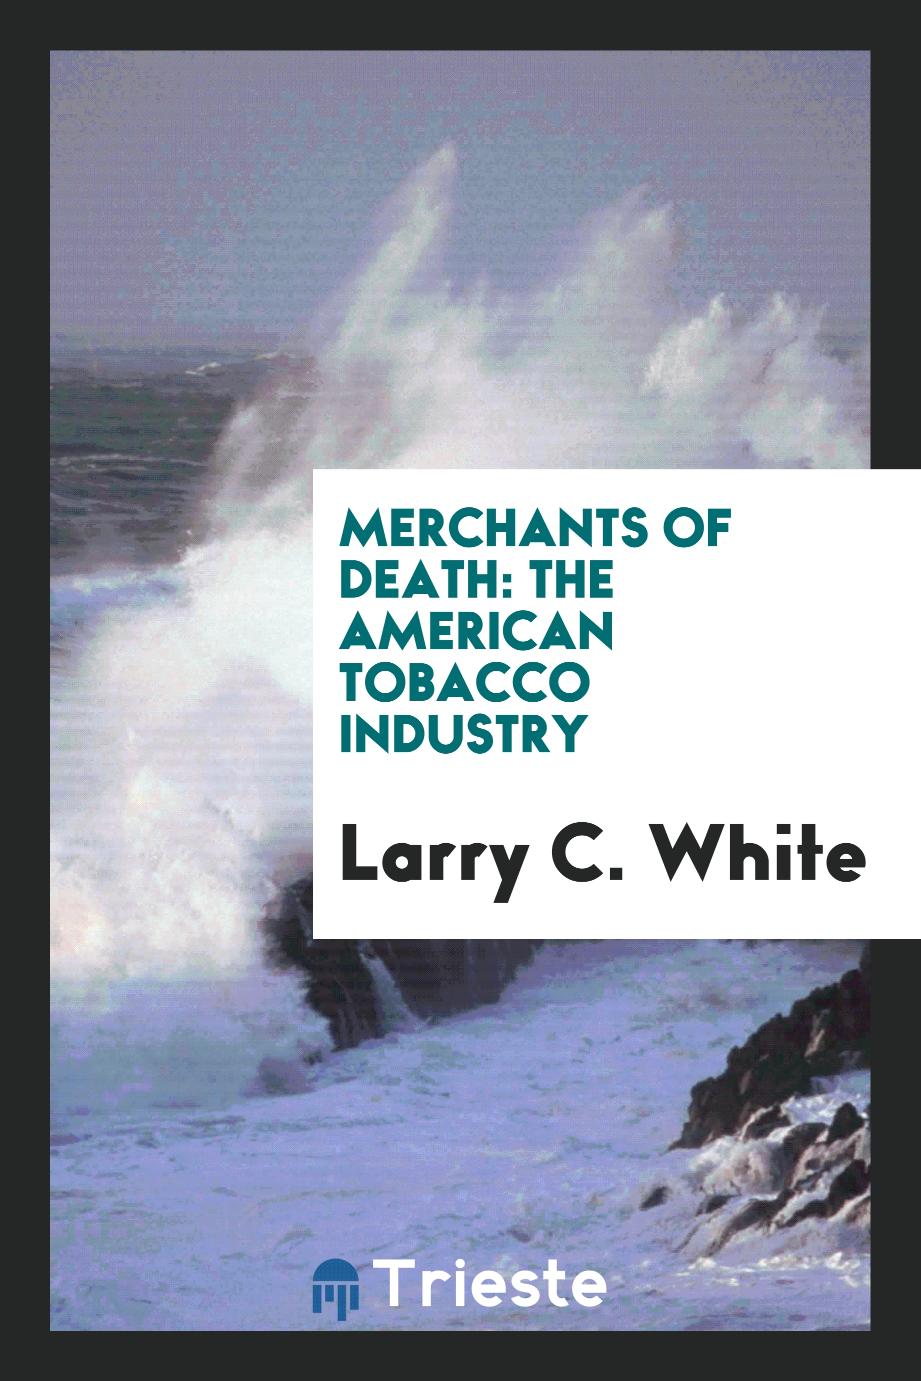 Merchants of death: the American tobacco industry